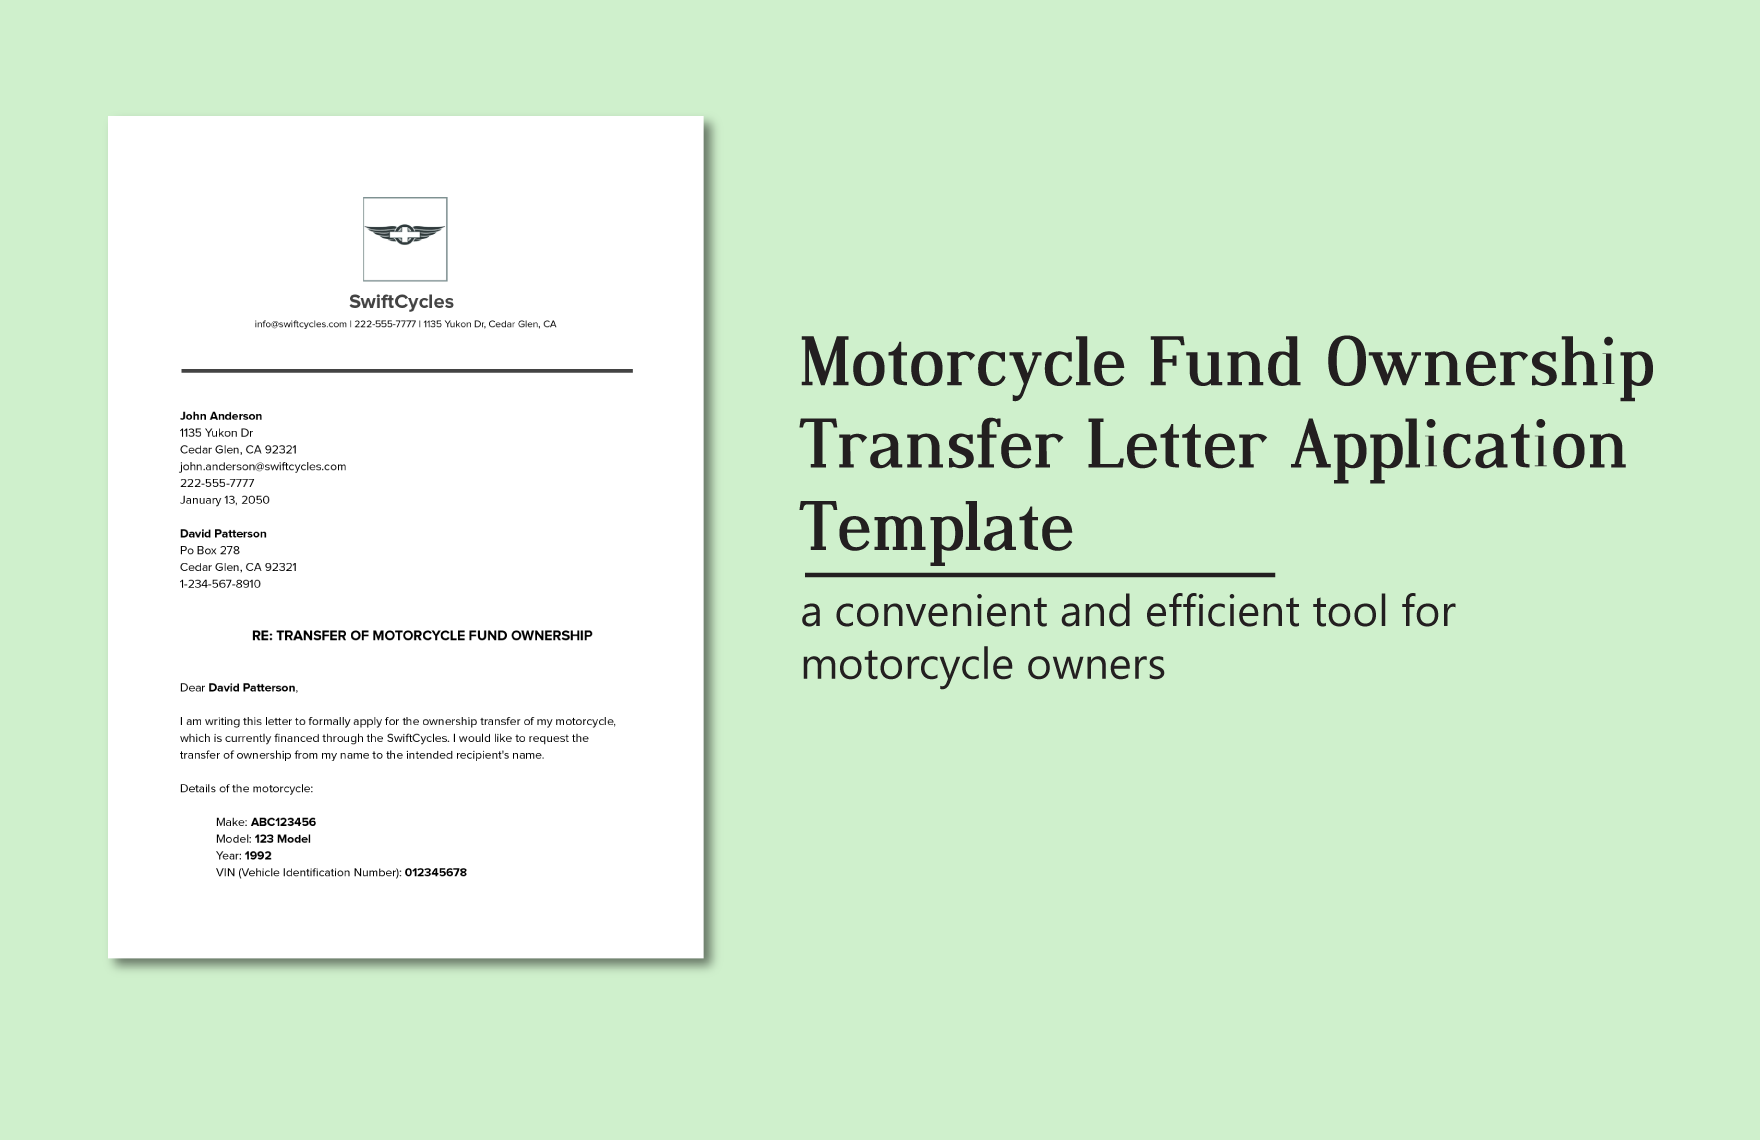 Motorcycle Fund Ownership Transfer Letter Application Template